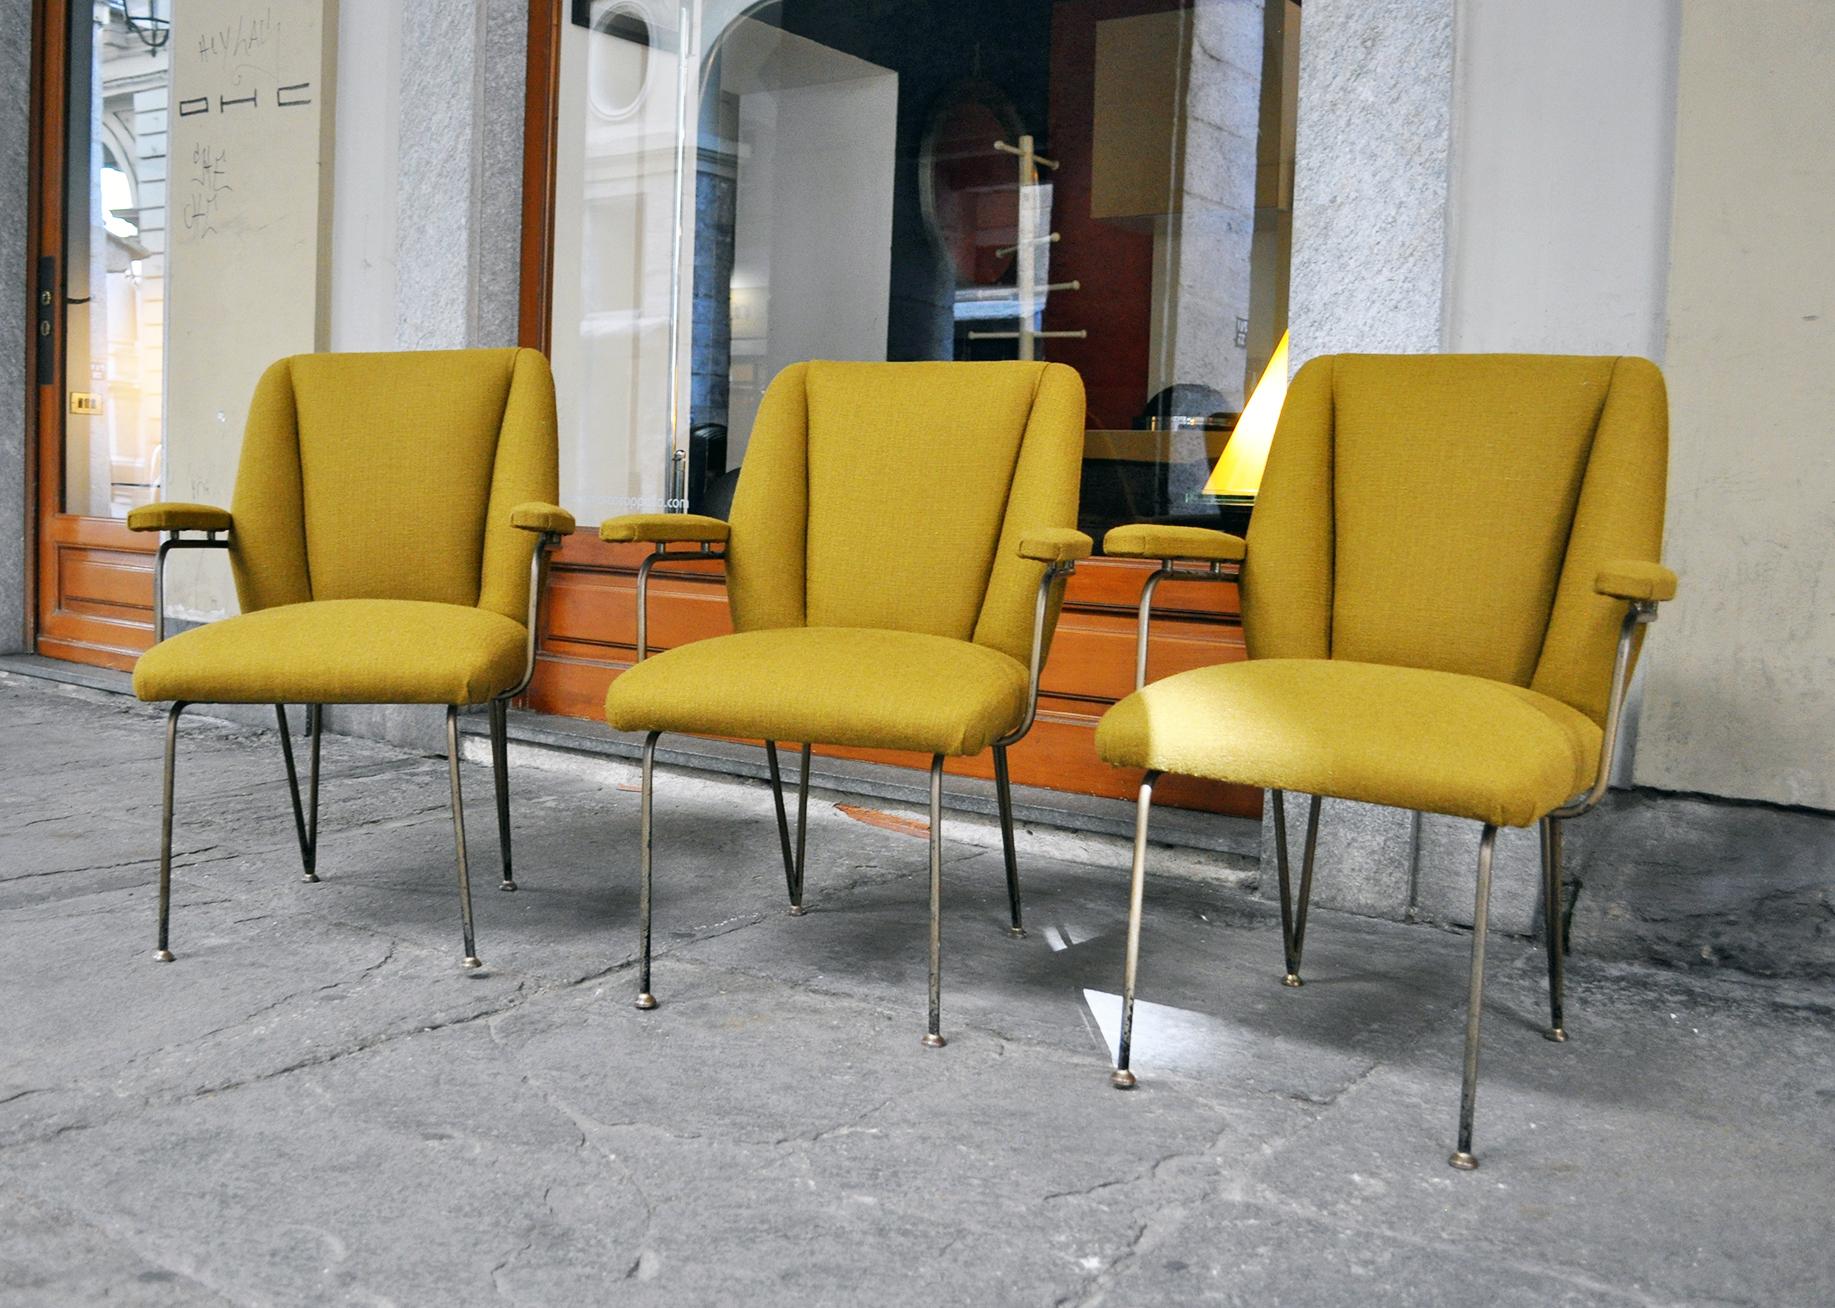 Three armchairs in metal and fabric, lined, with brass feet
Italian production
1950s.